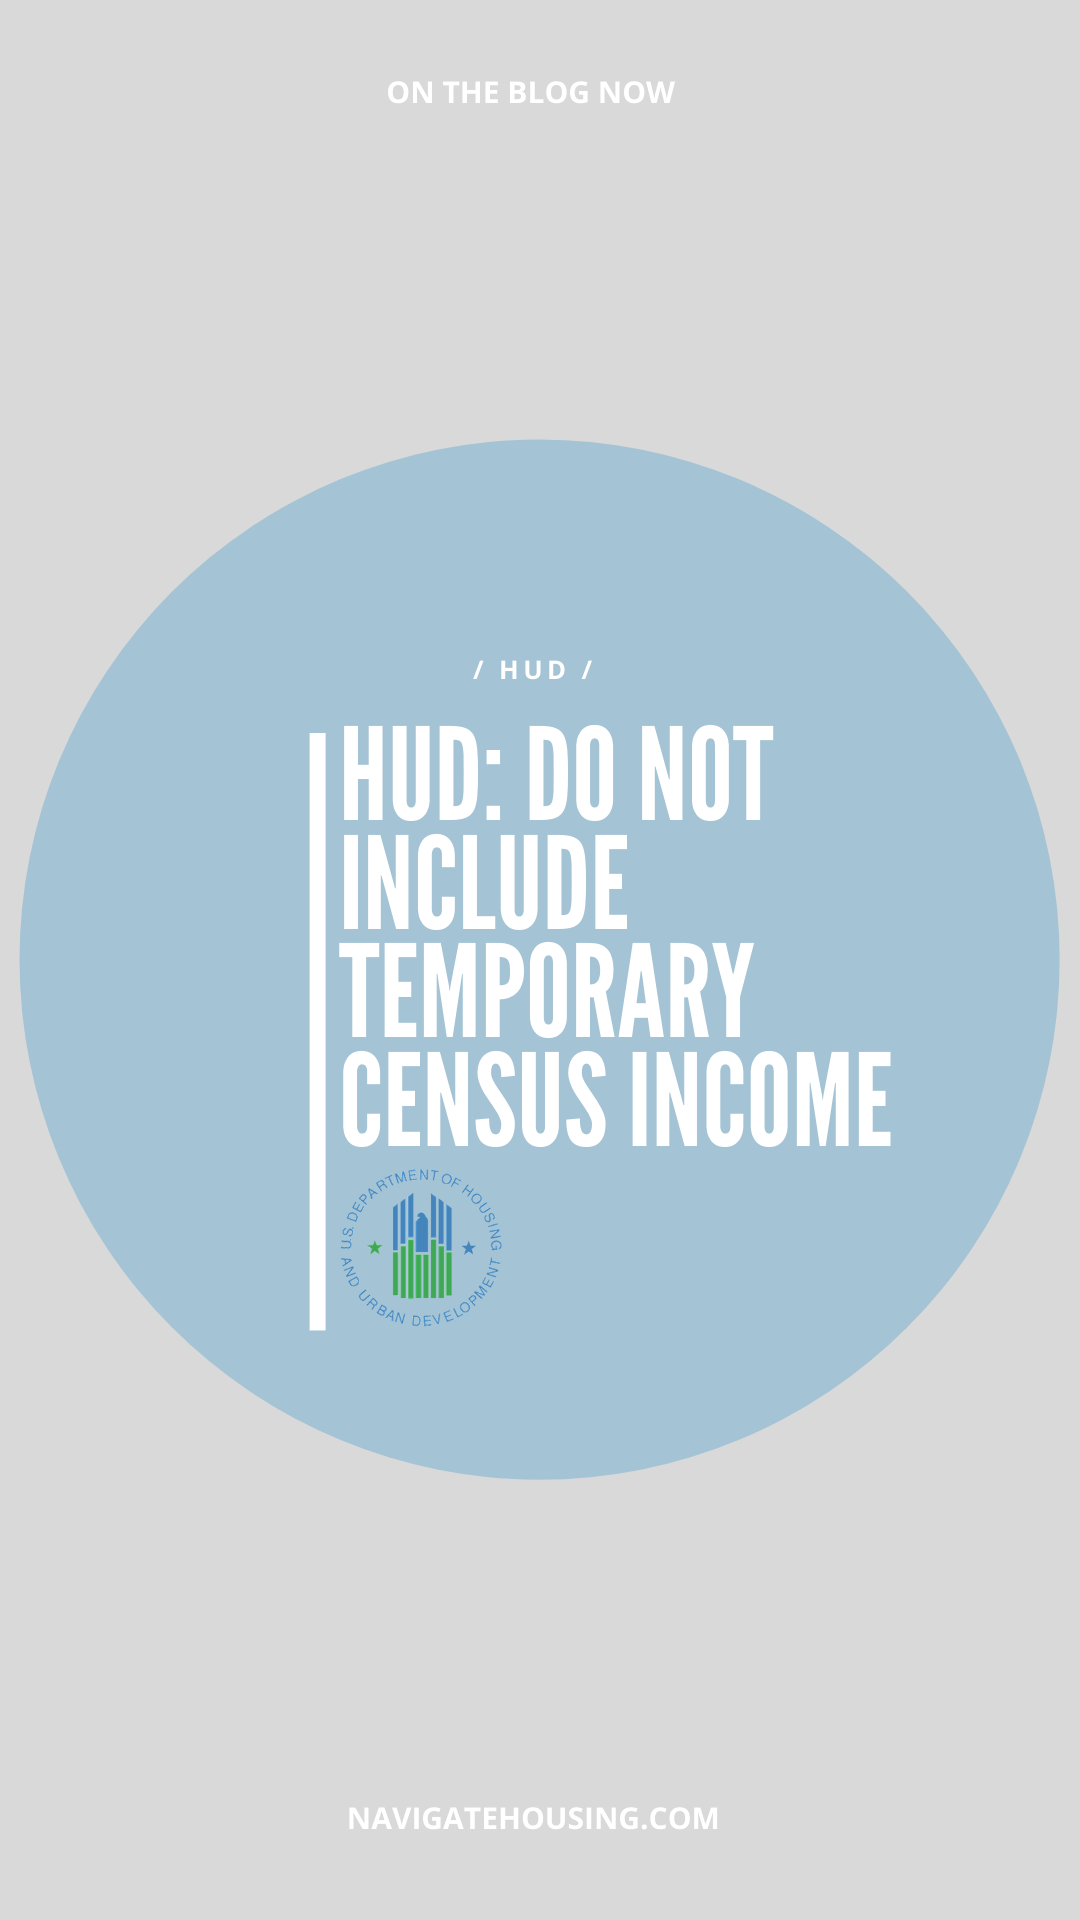 HUD: Do not include temporary Census income